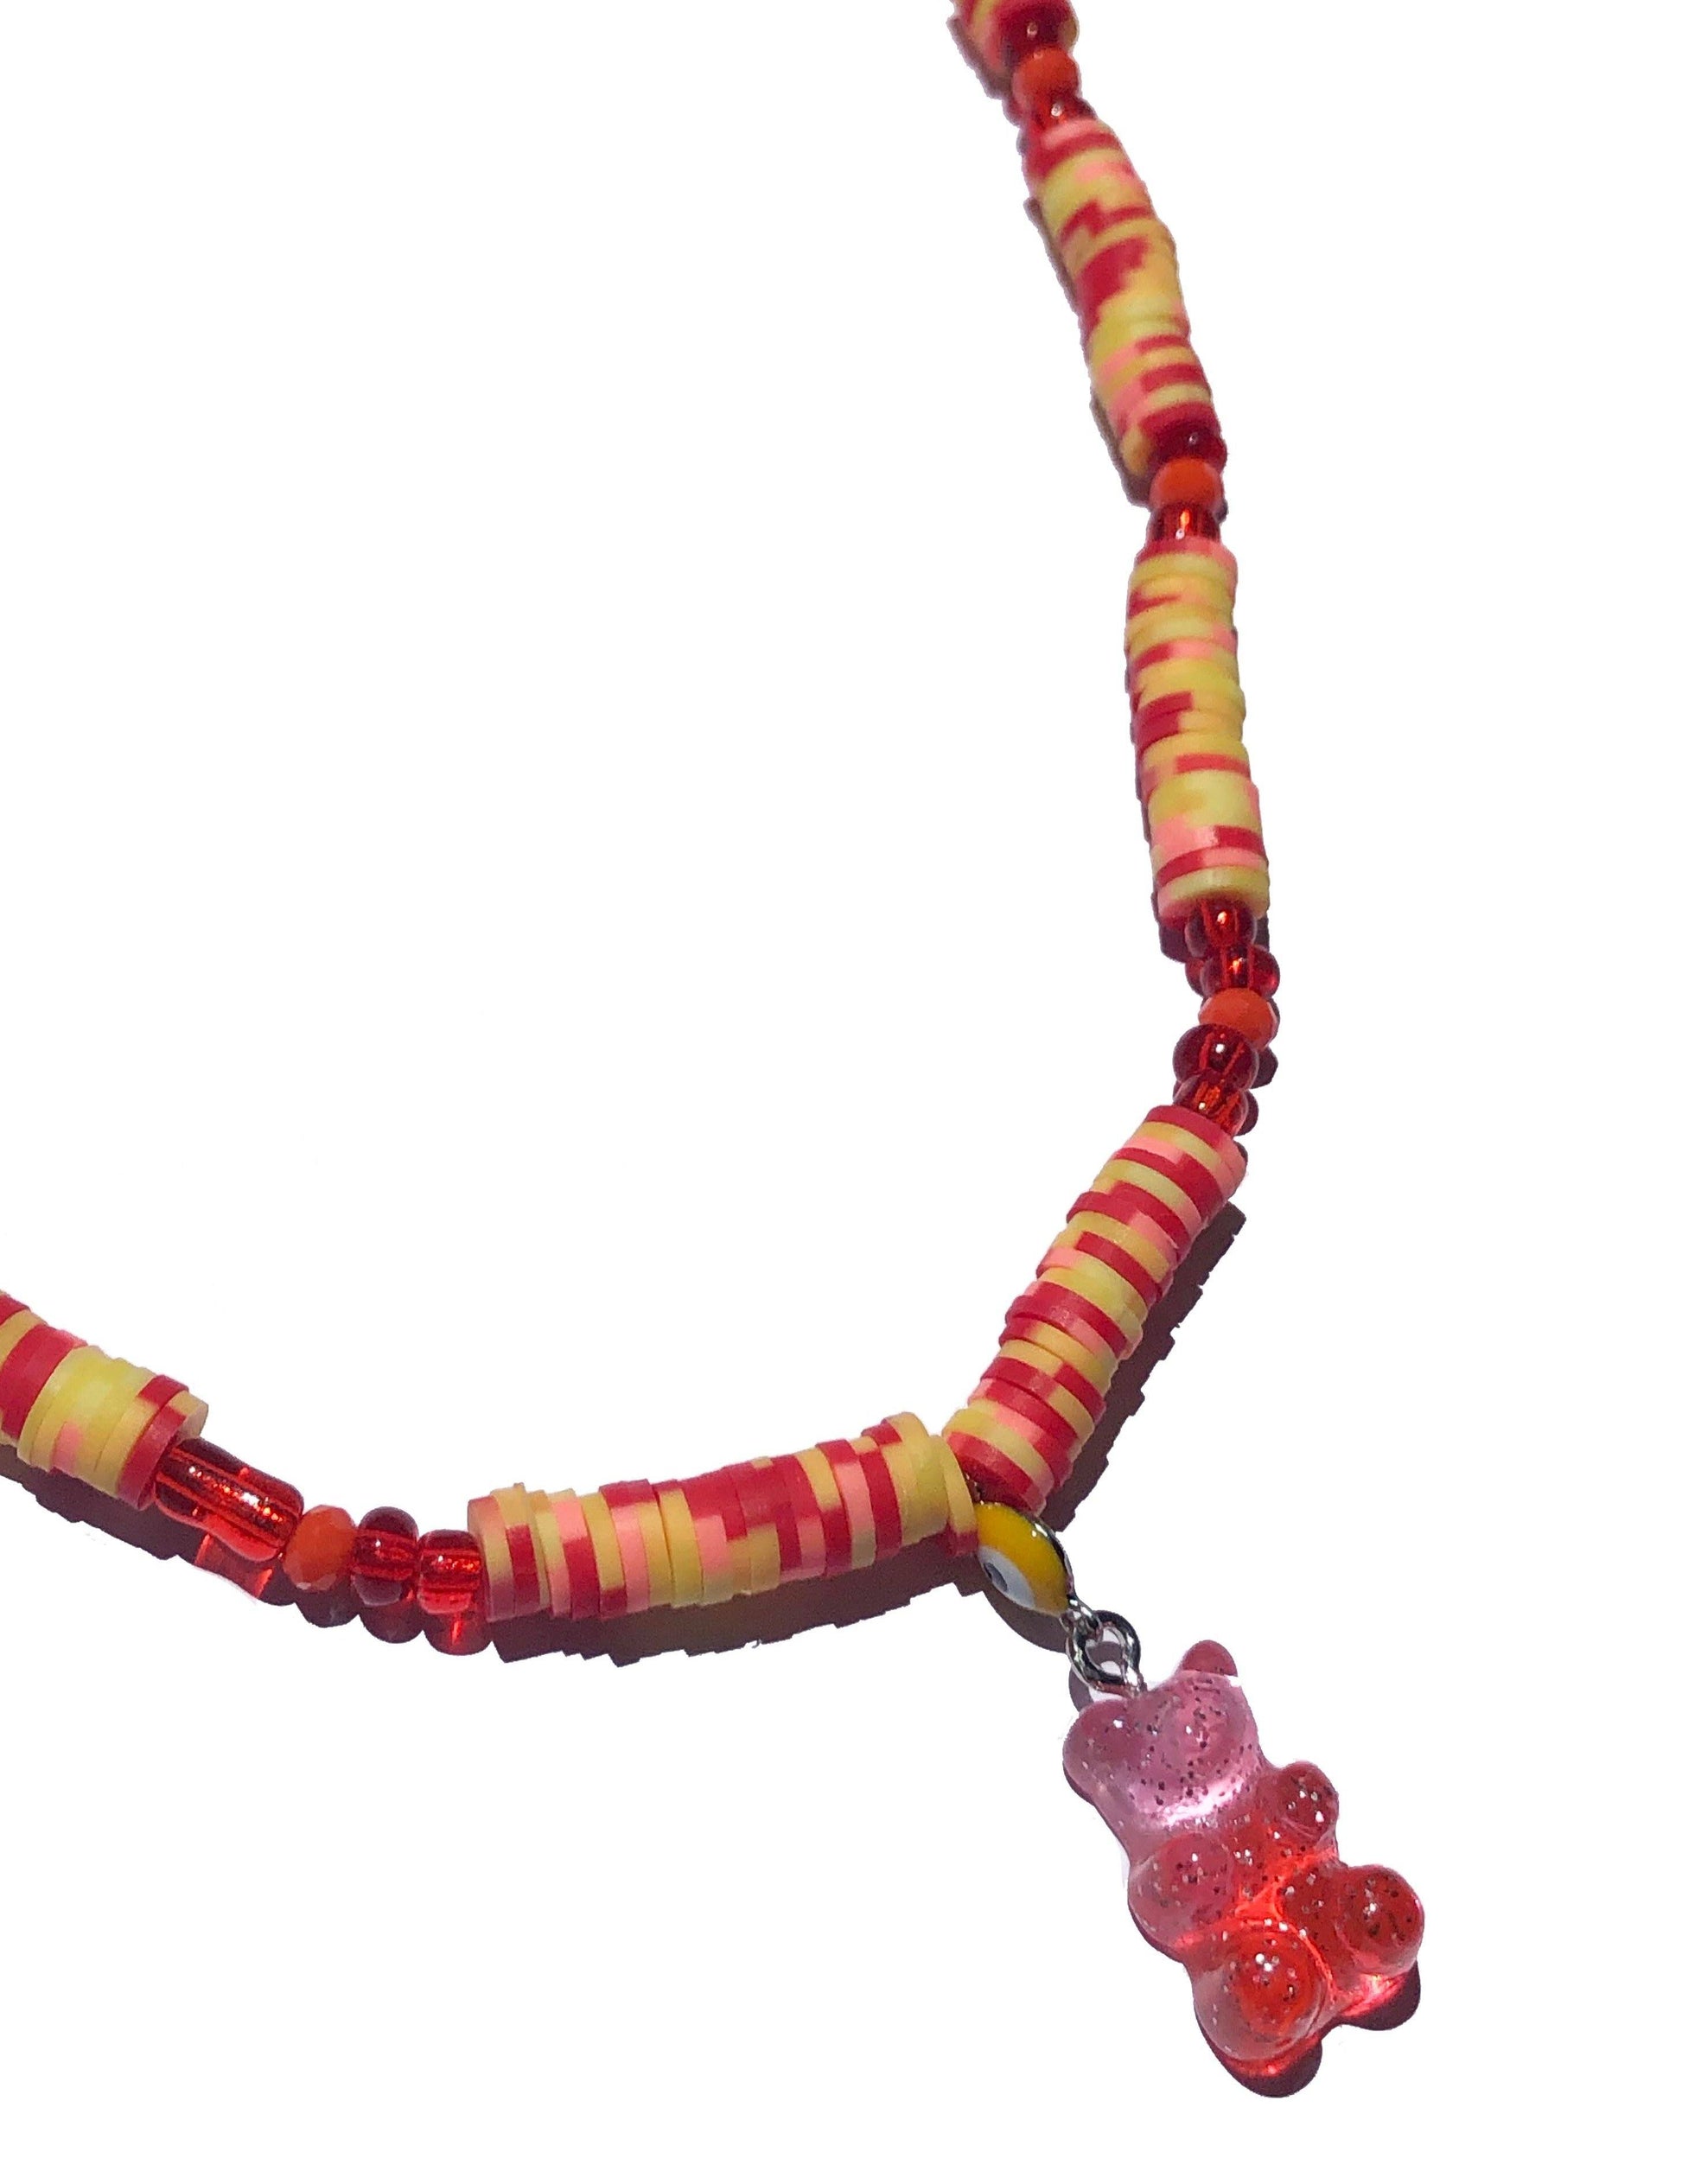 handcrafted necklace beaded using red, orange, yellow and pink glass and flat rubber beads. Accompanied by a yellow evil eye, and pink and orange gummy bear-like charm.